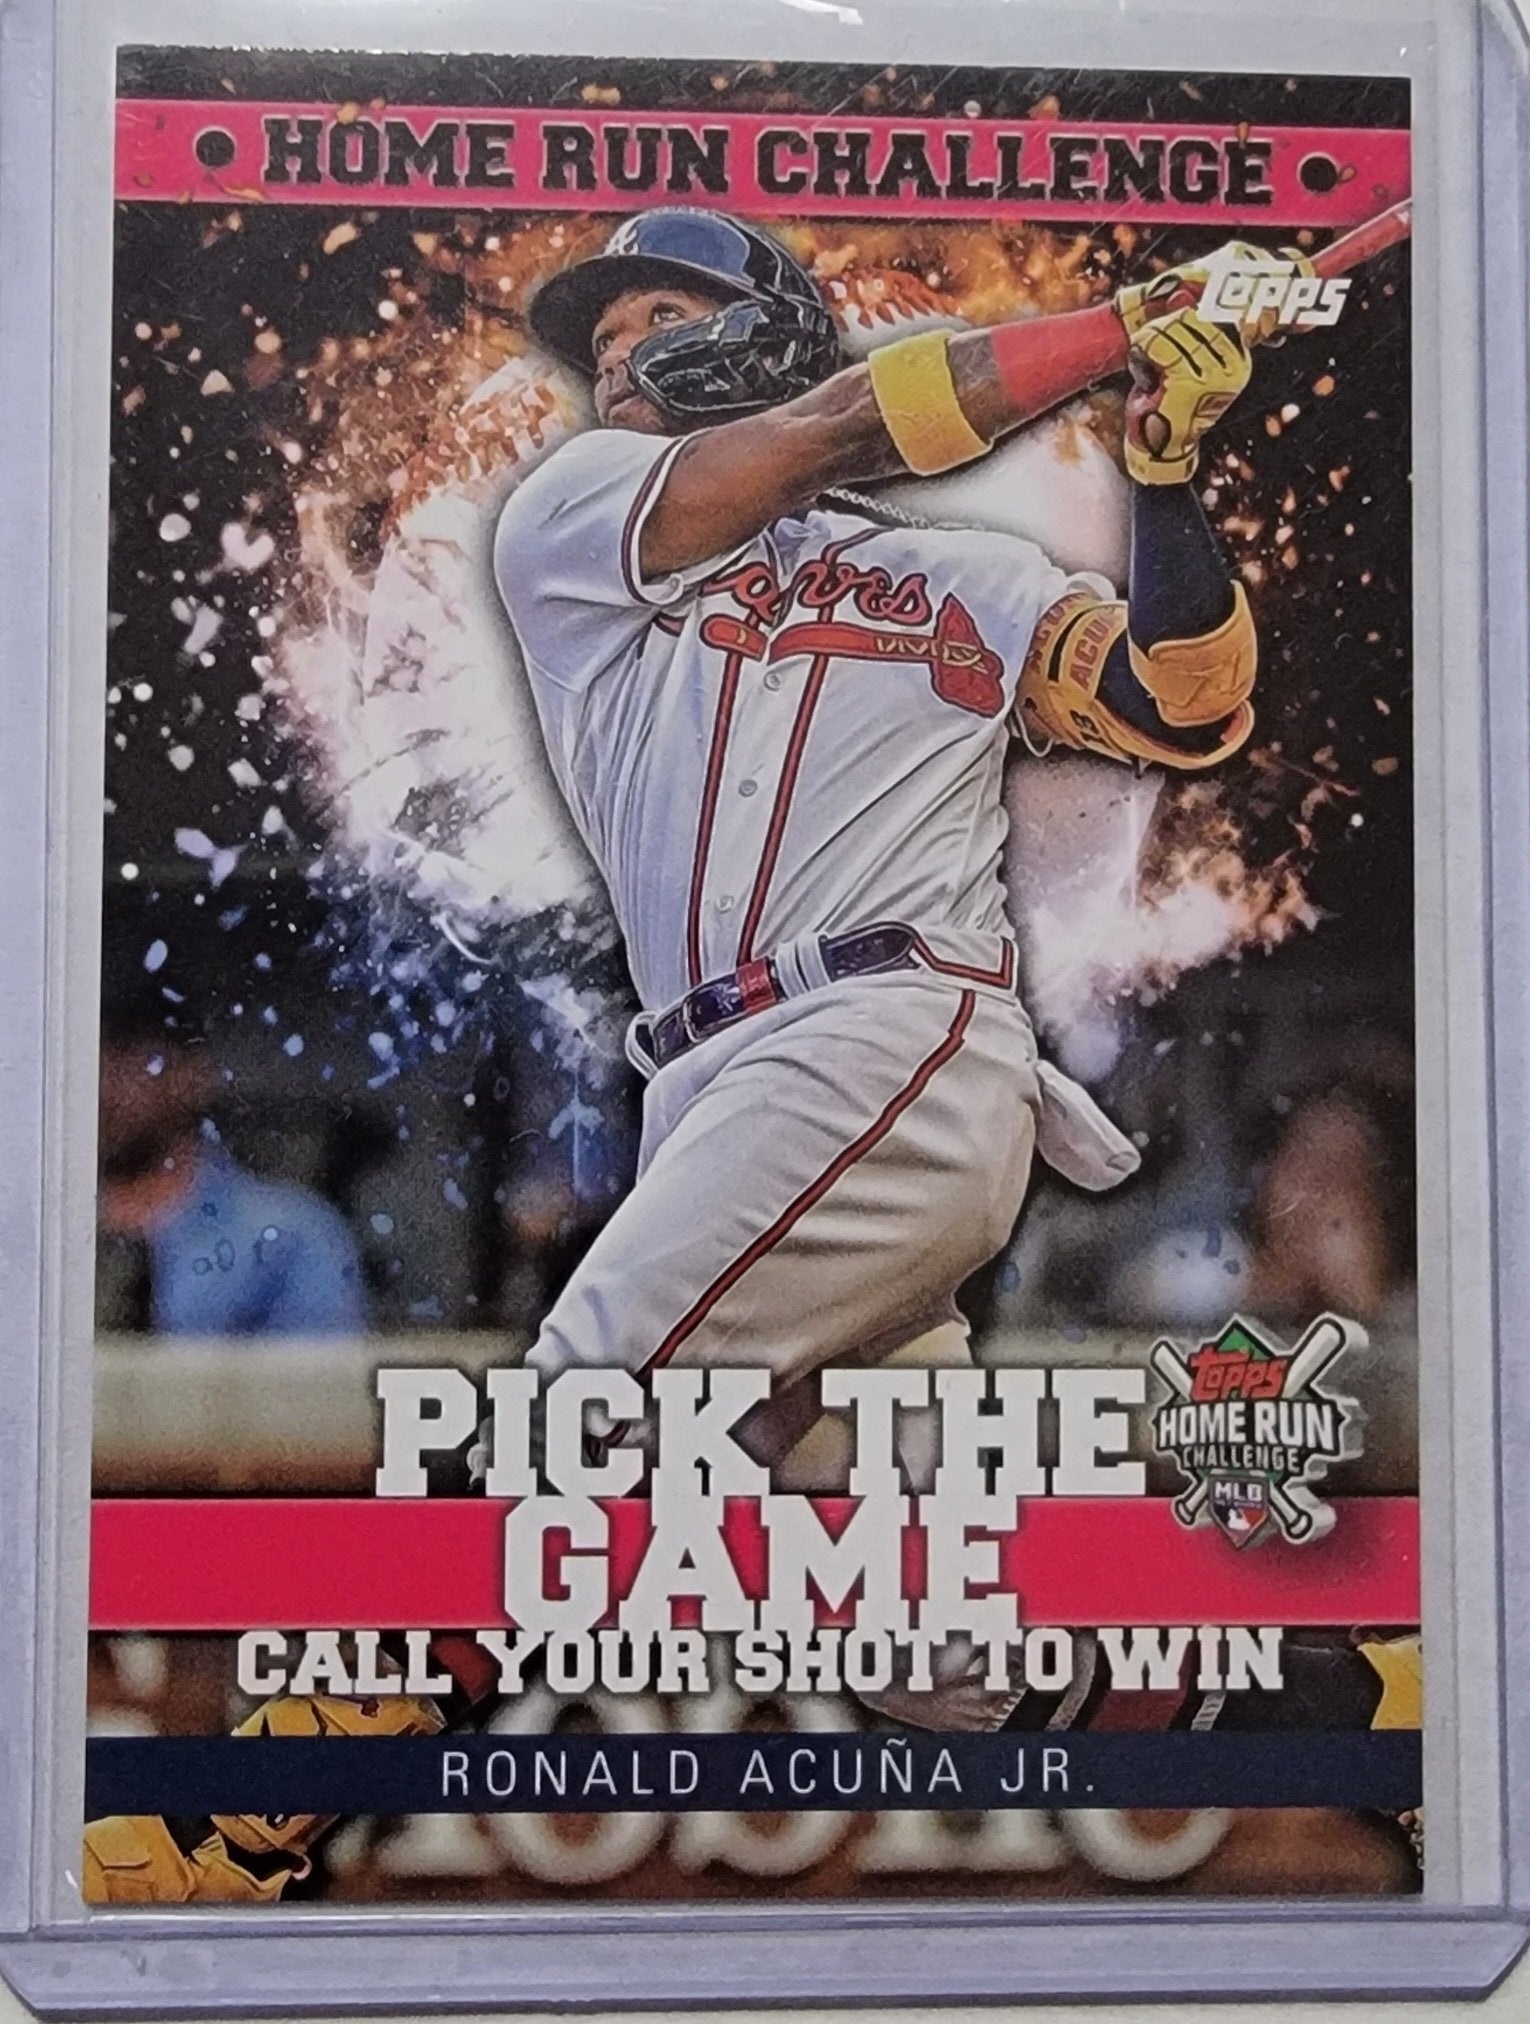 2022 Topps Series 2 Ronald Acuna Jr. Pick the Game Unscratched Insert  Atlanta Braves Baseball Card - MLB Collectible AVM1